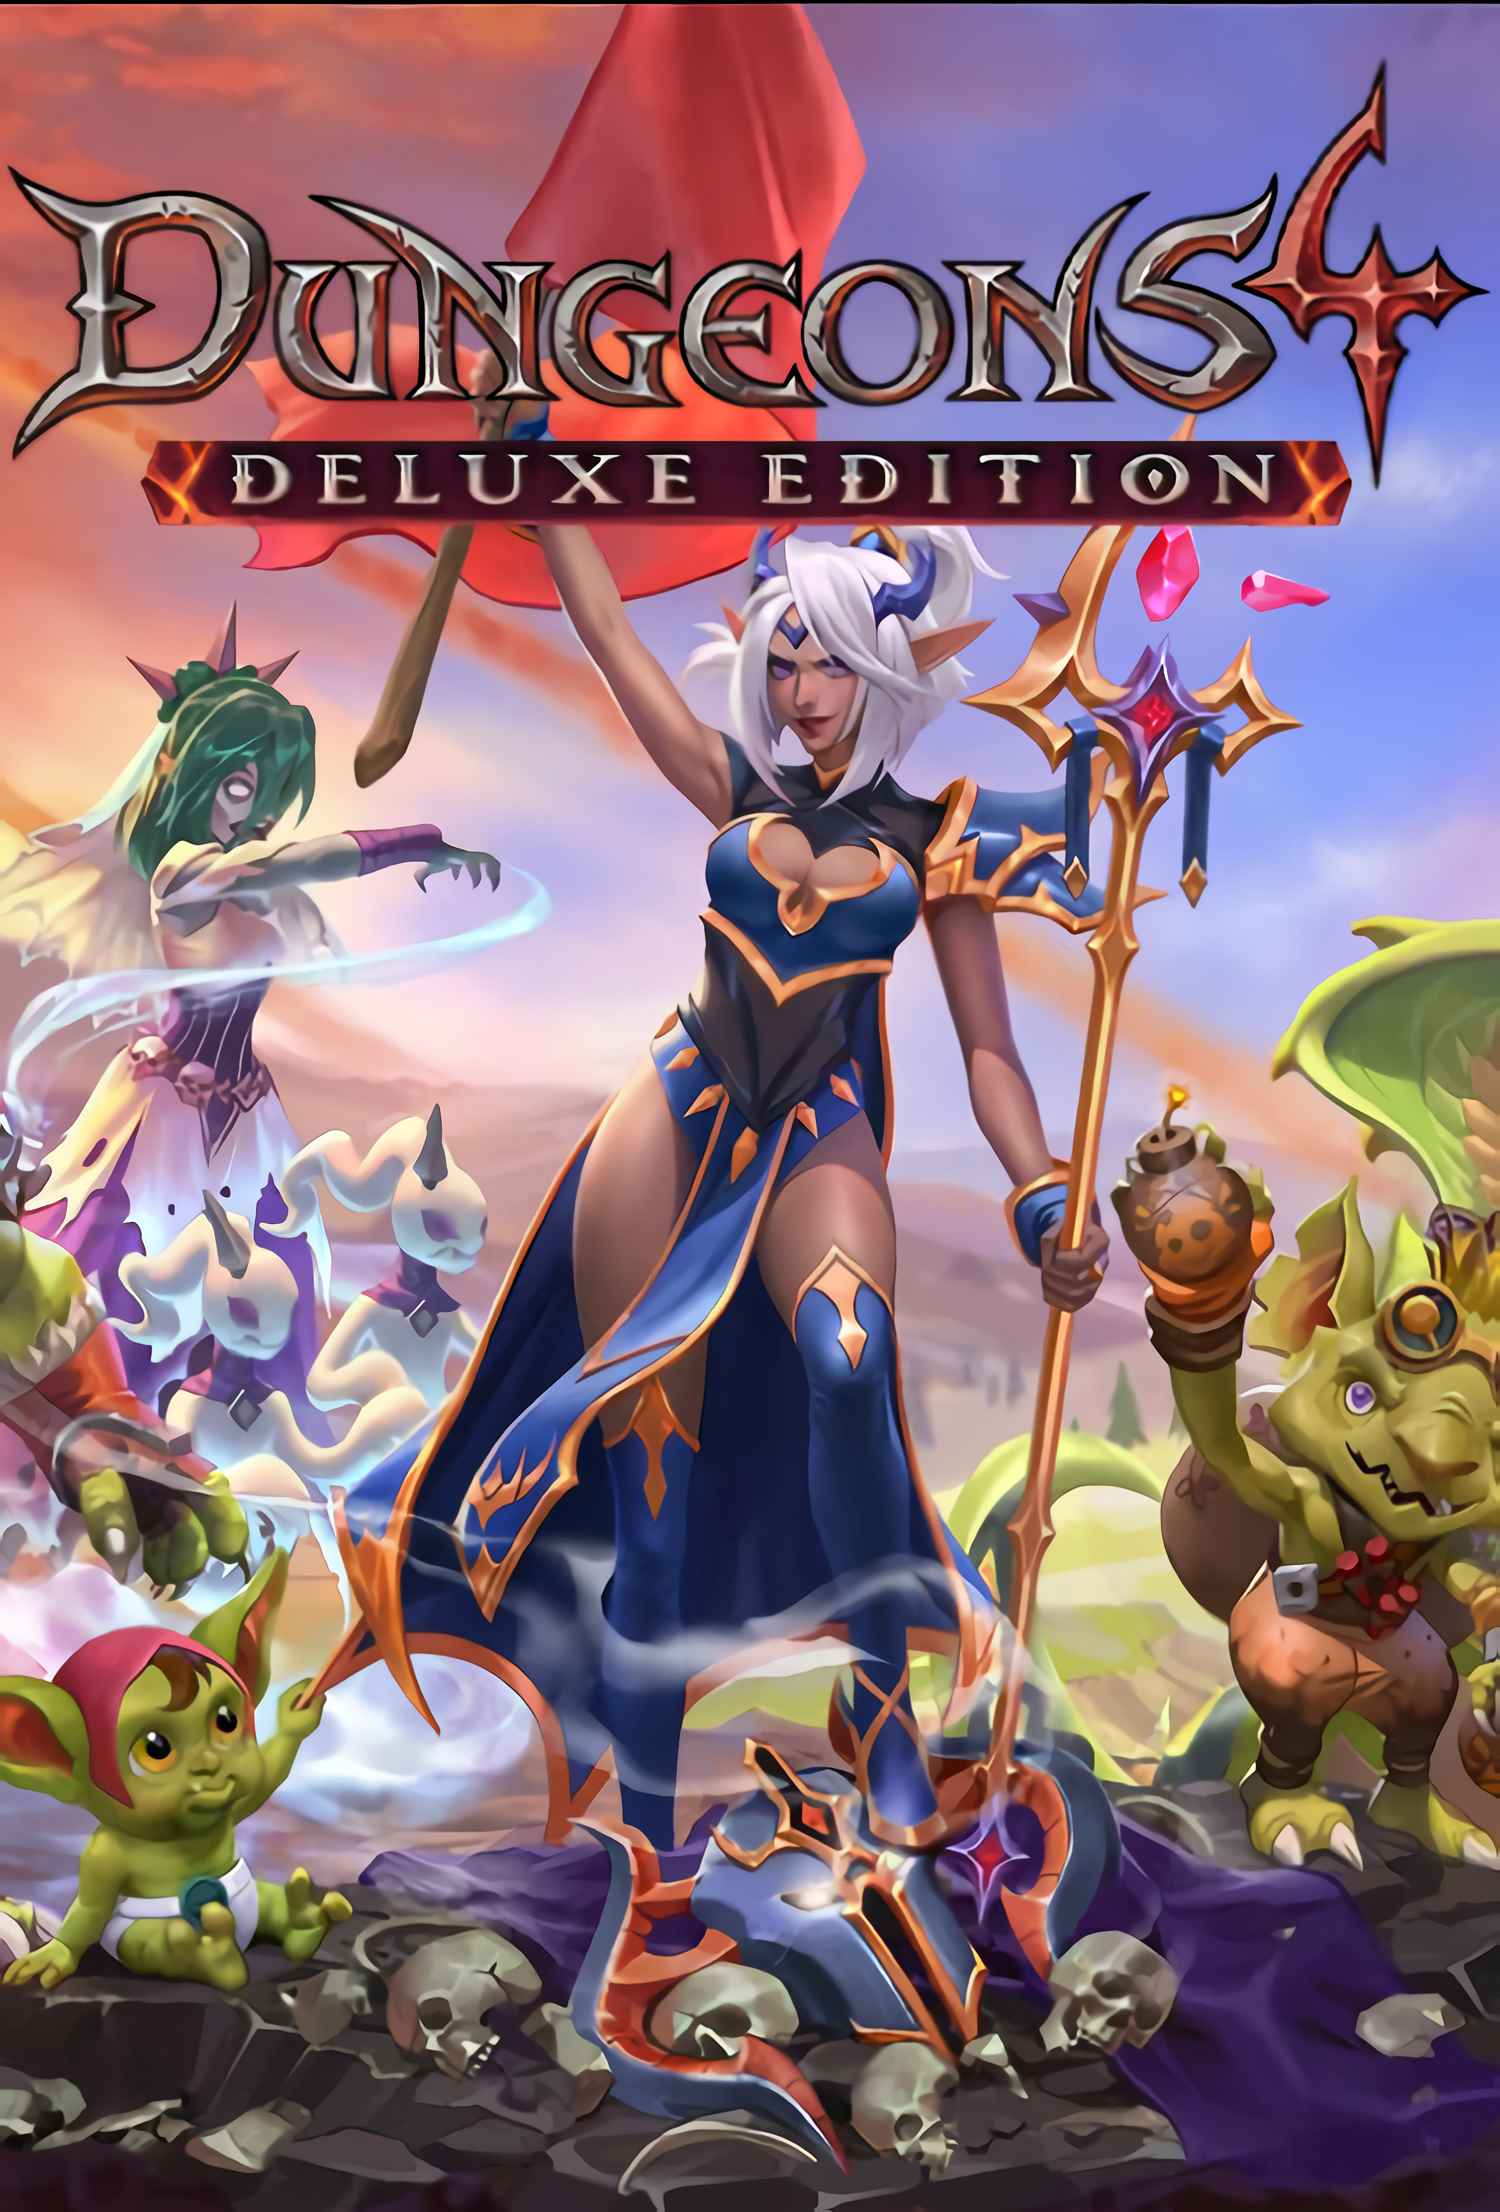 Dungeons 4. Deluxe Edition [PC, Цифровая версия] (Цифровая версия)